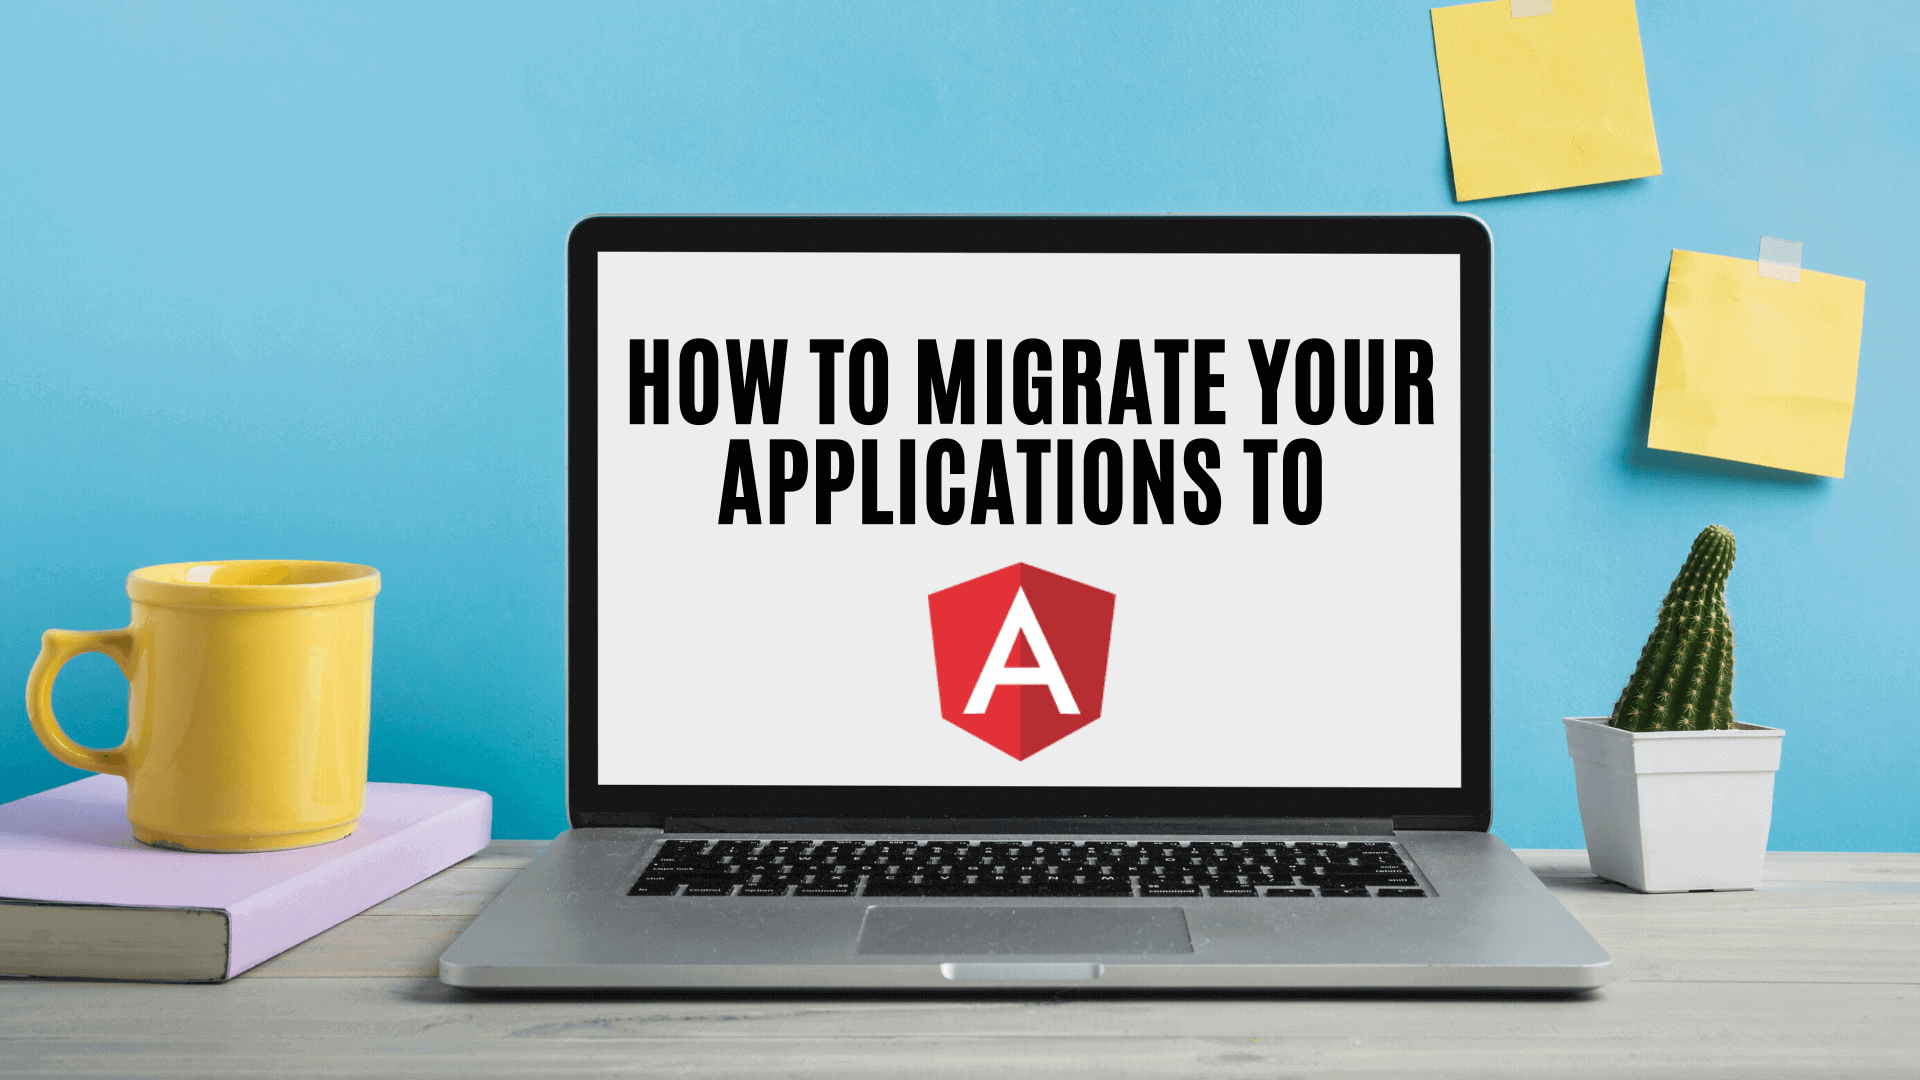 How to migrate your applications to Angular